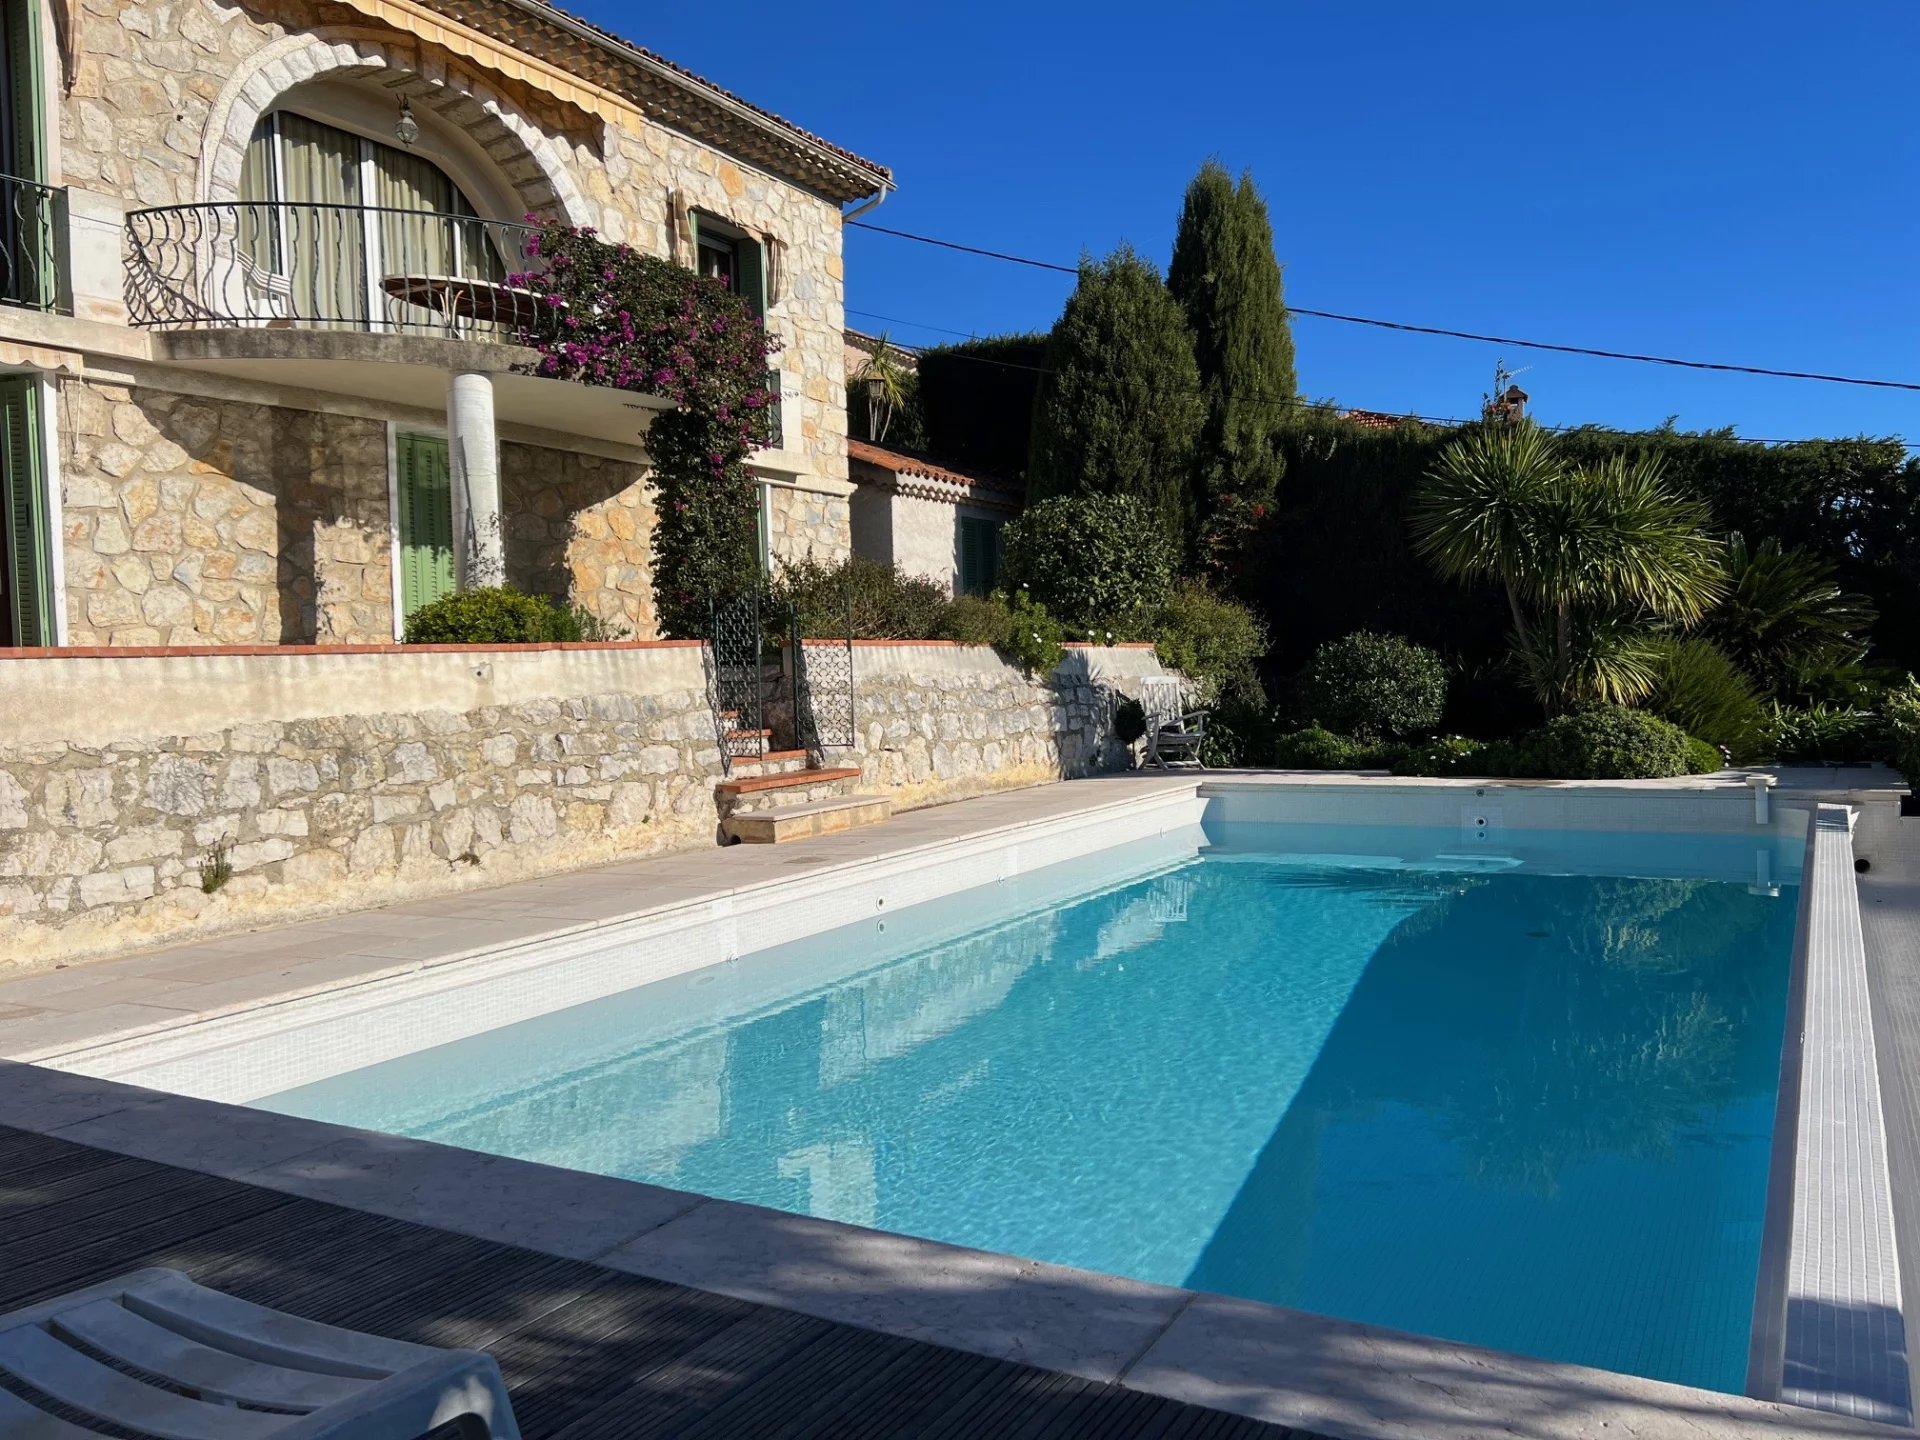 Vence in residential area close to the city center